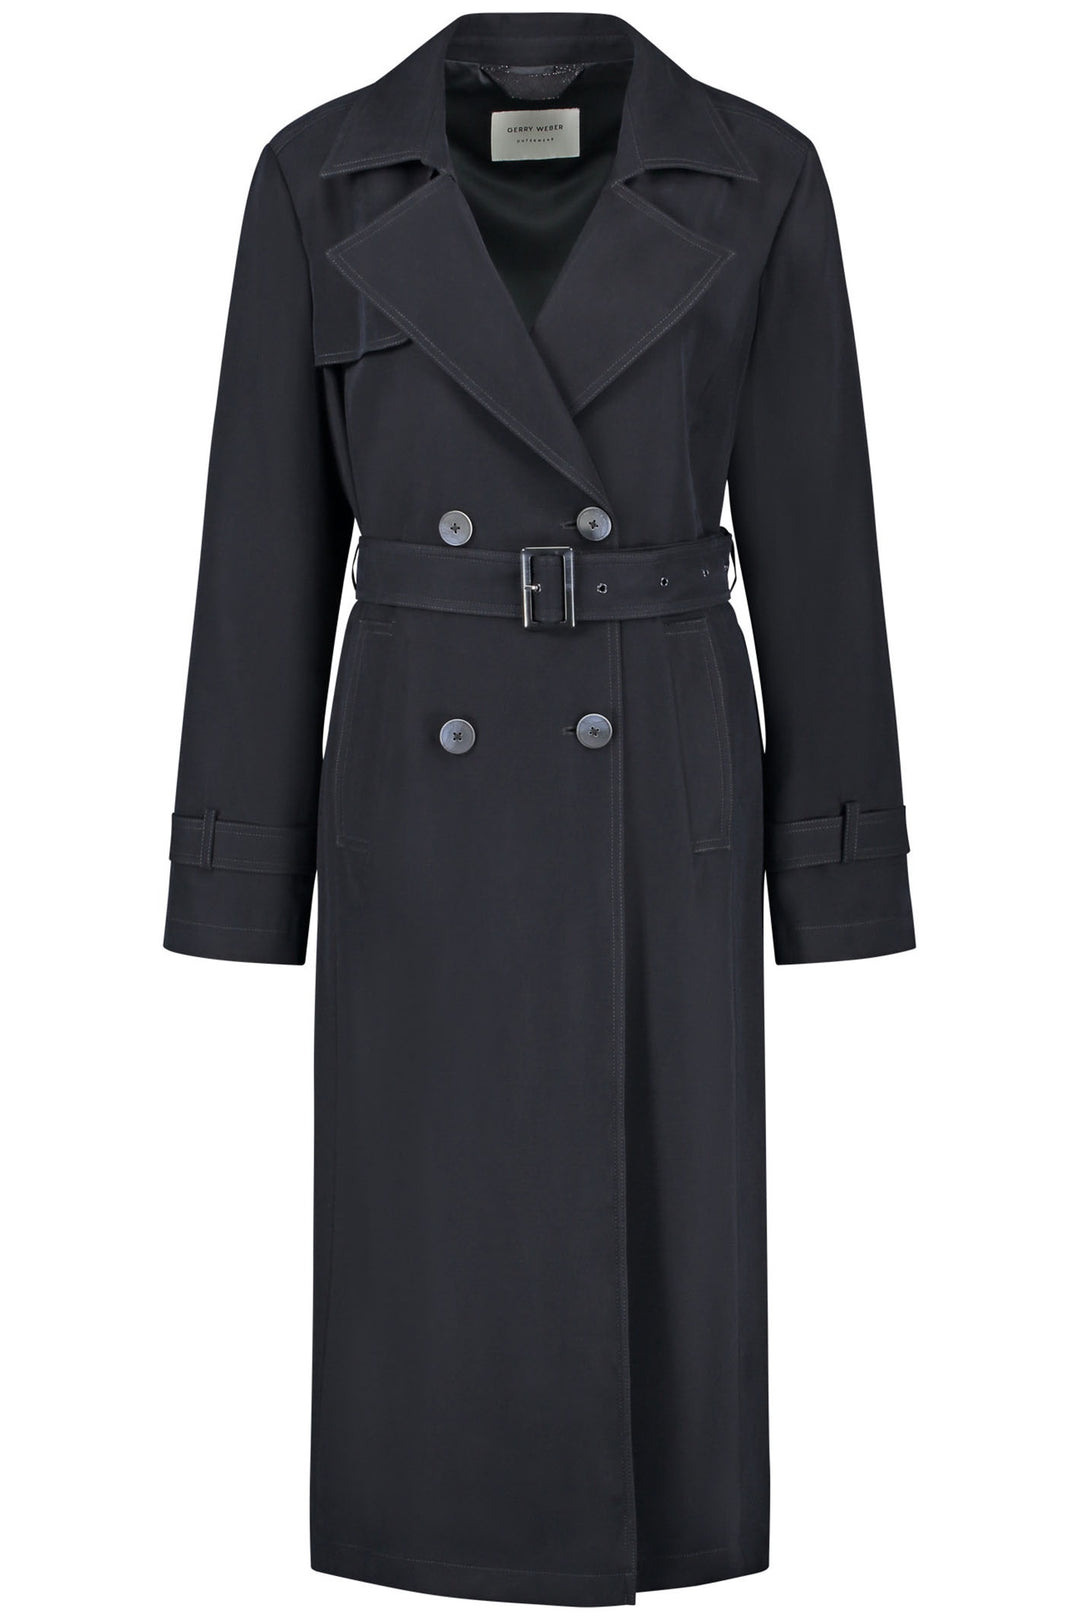 Gerry Weber 350003-31172 Navy Trench Coat - Dotique Chesterfield